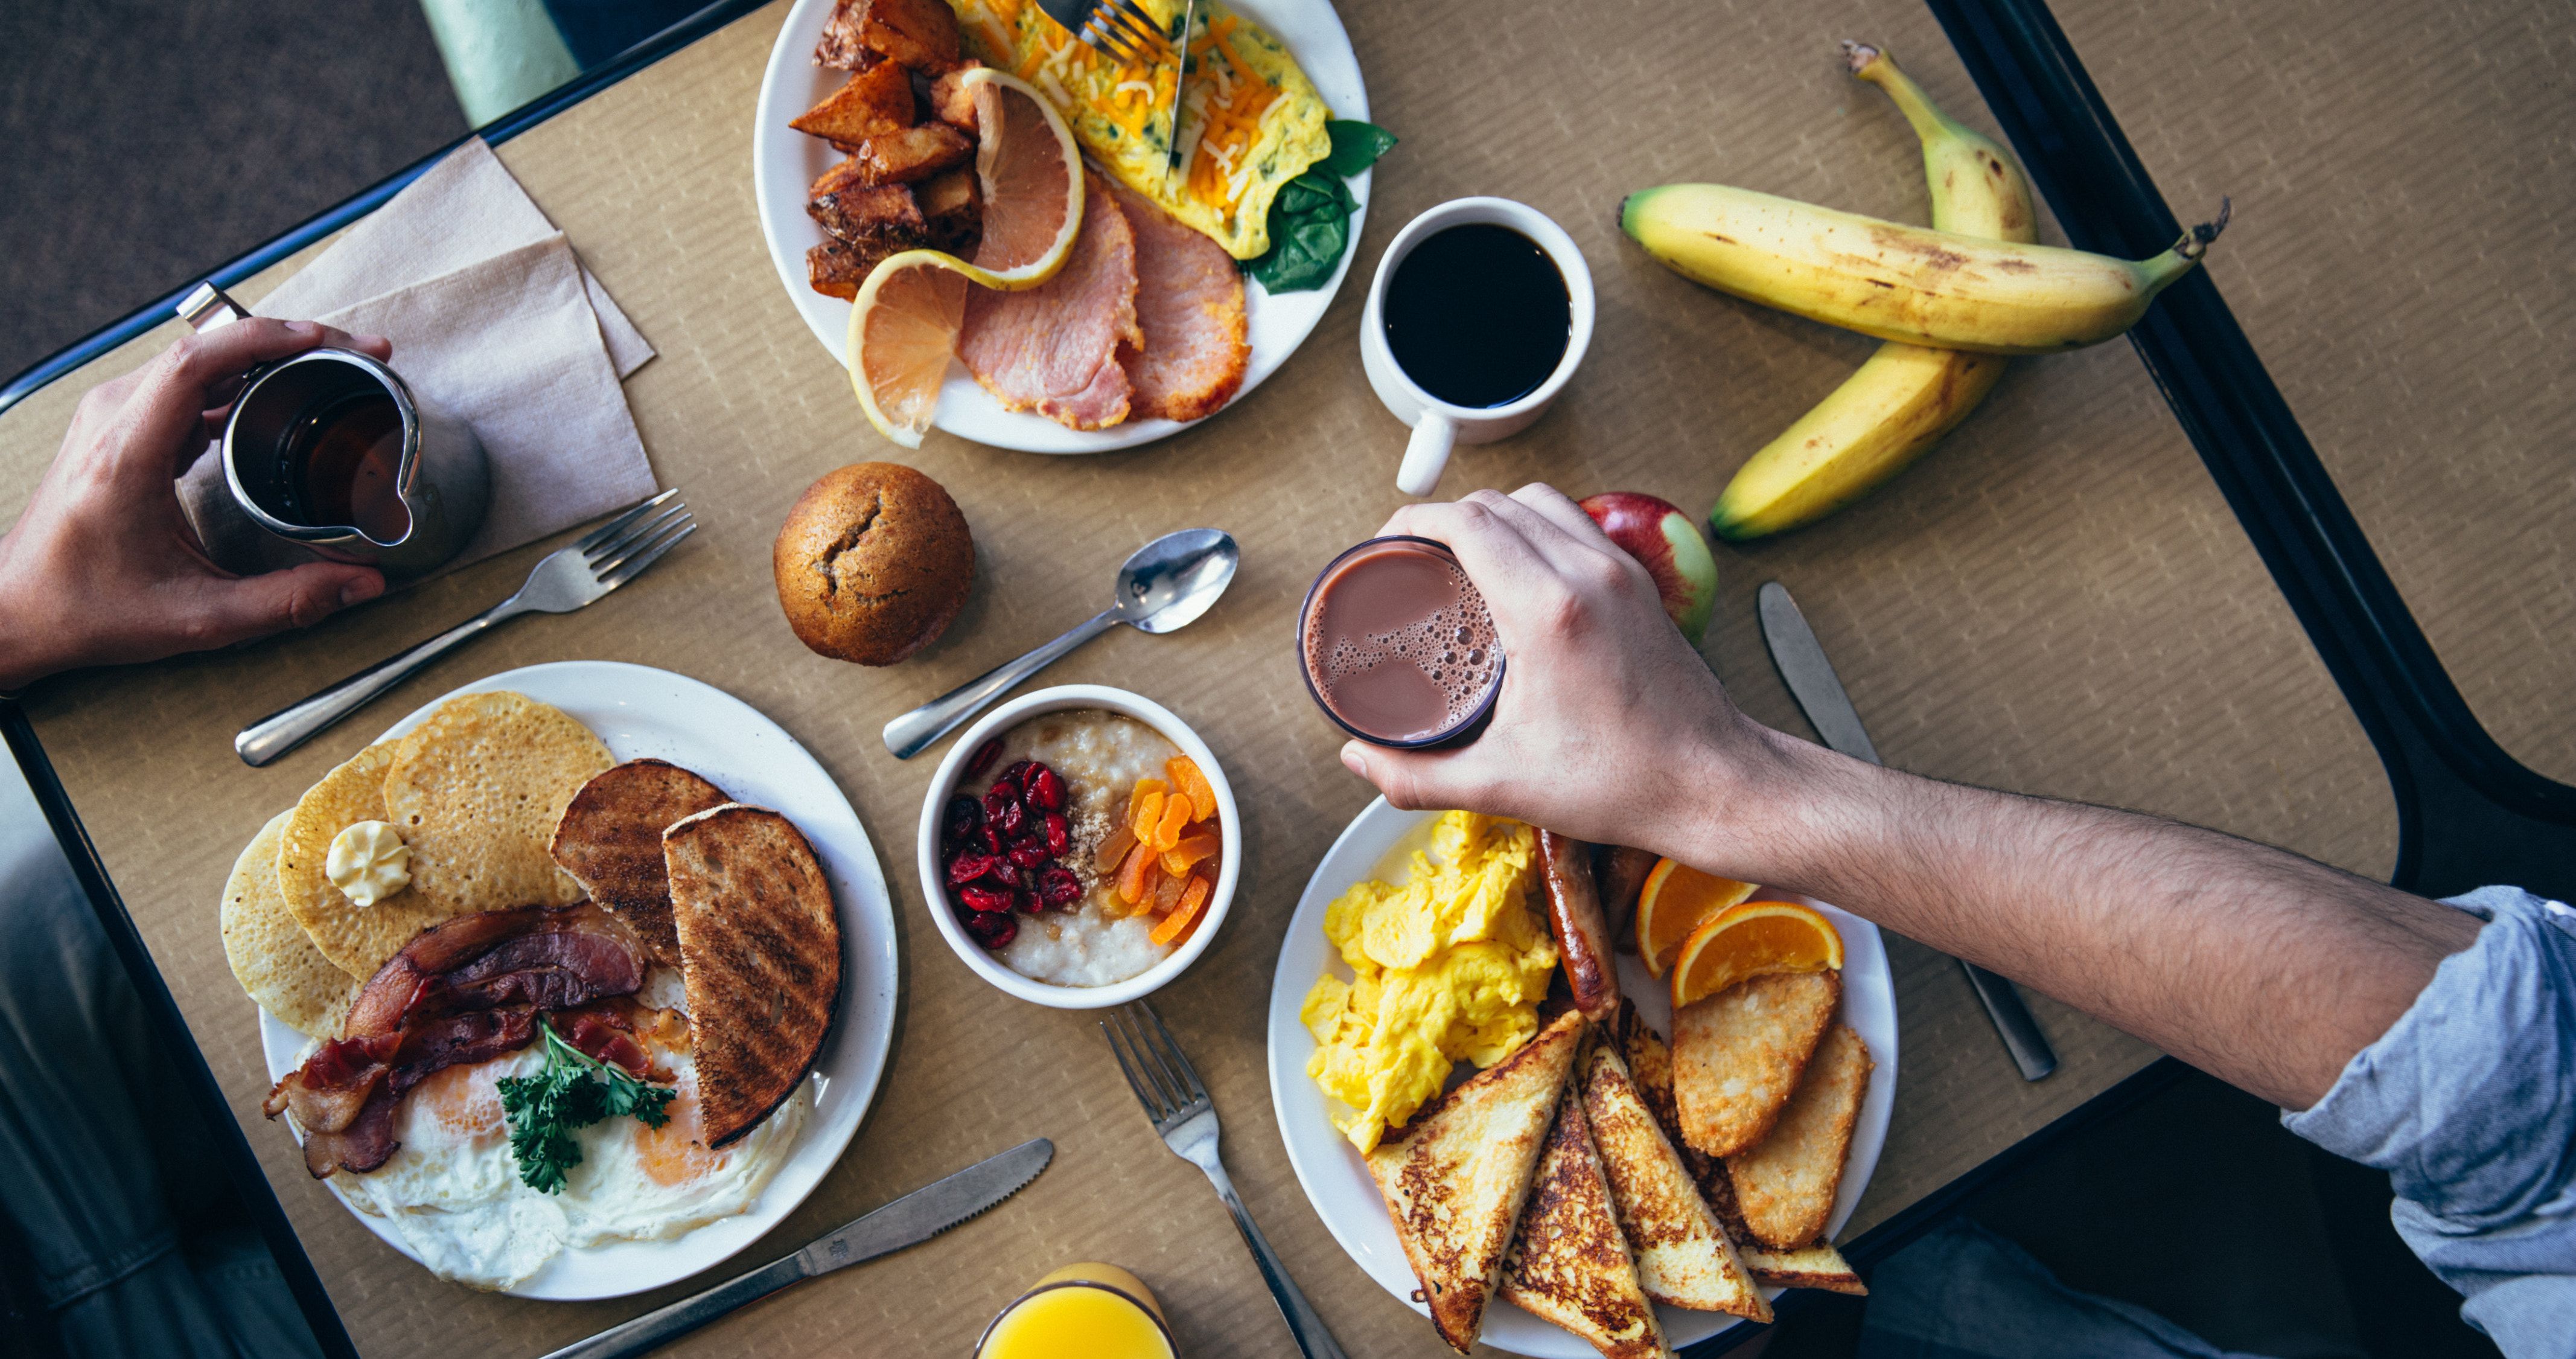 Two people enjoying a breakfast spread with coffee, toast, eggs, and fruit. - Foodie, food